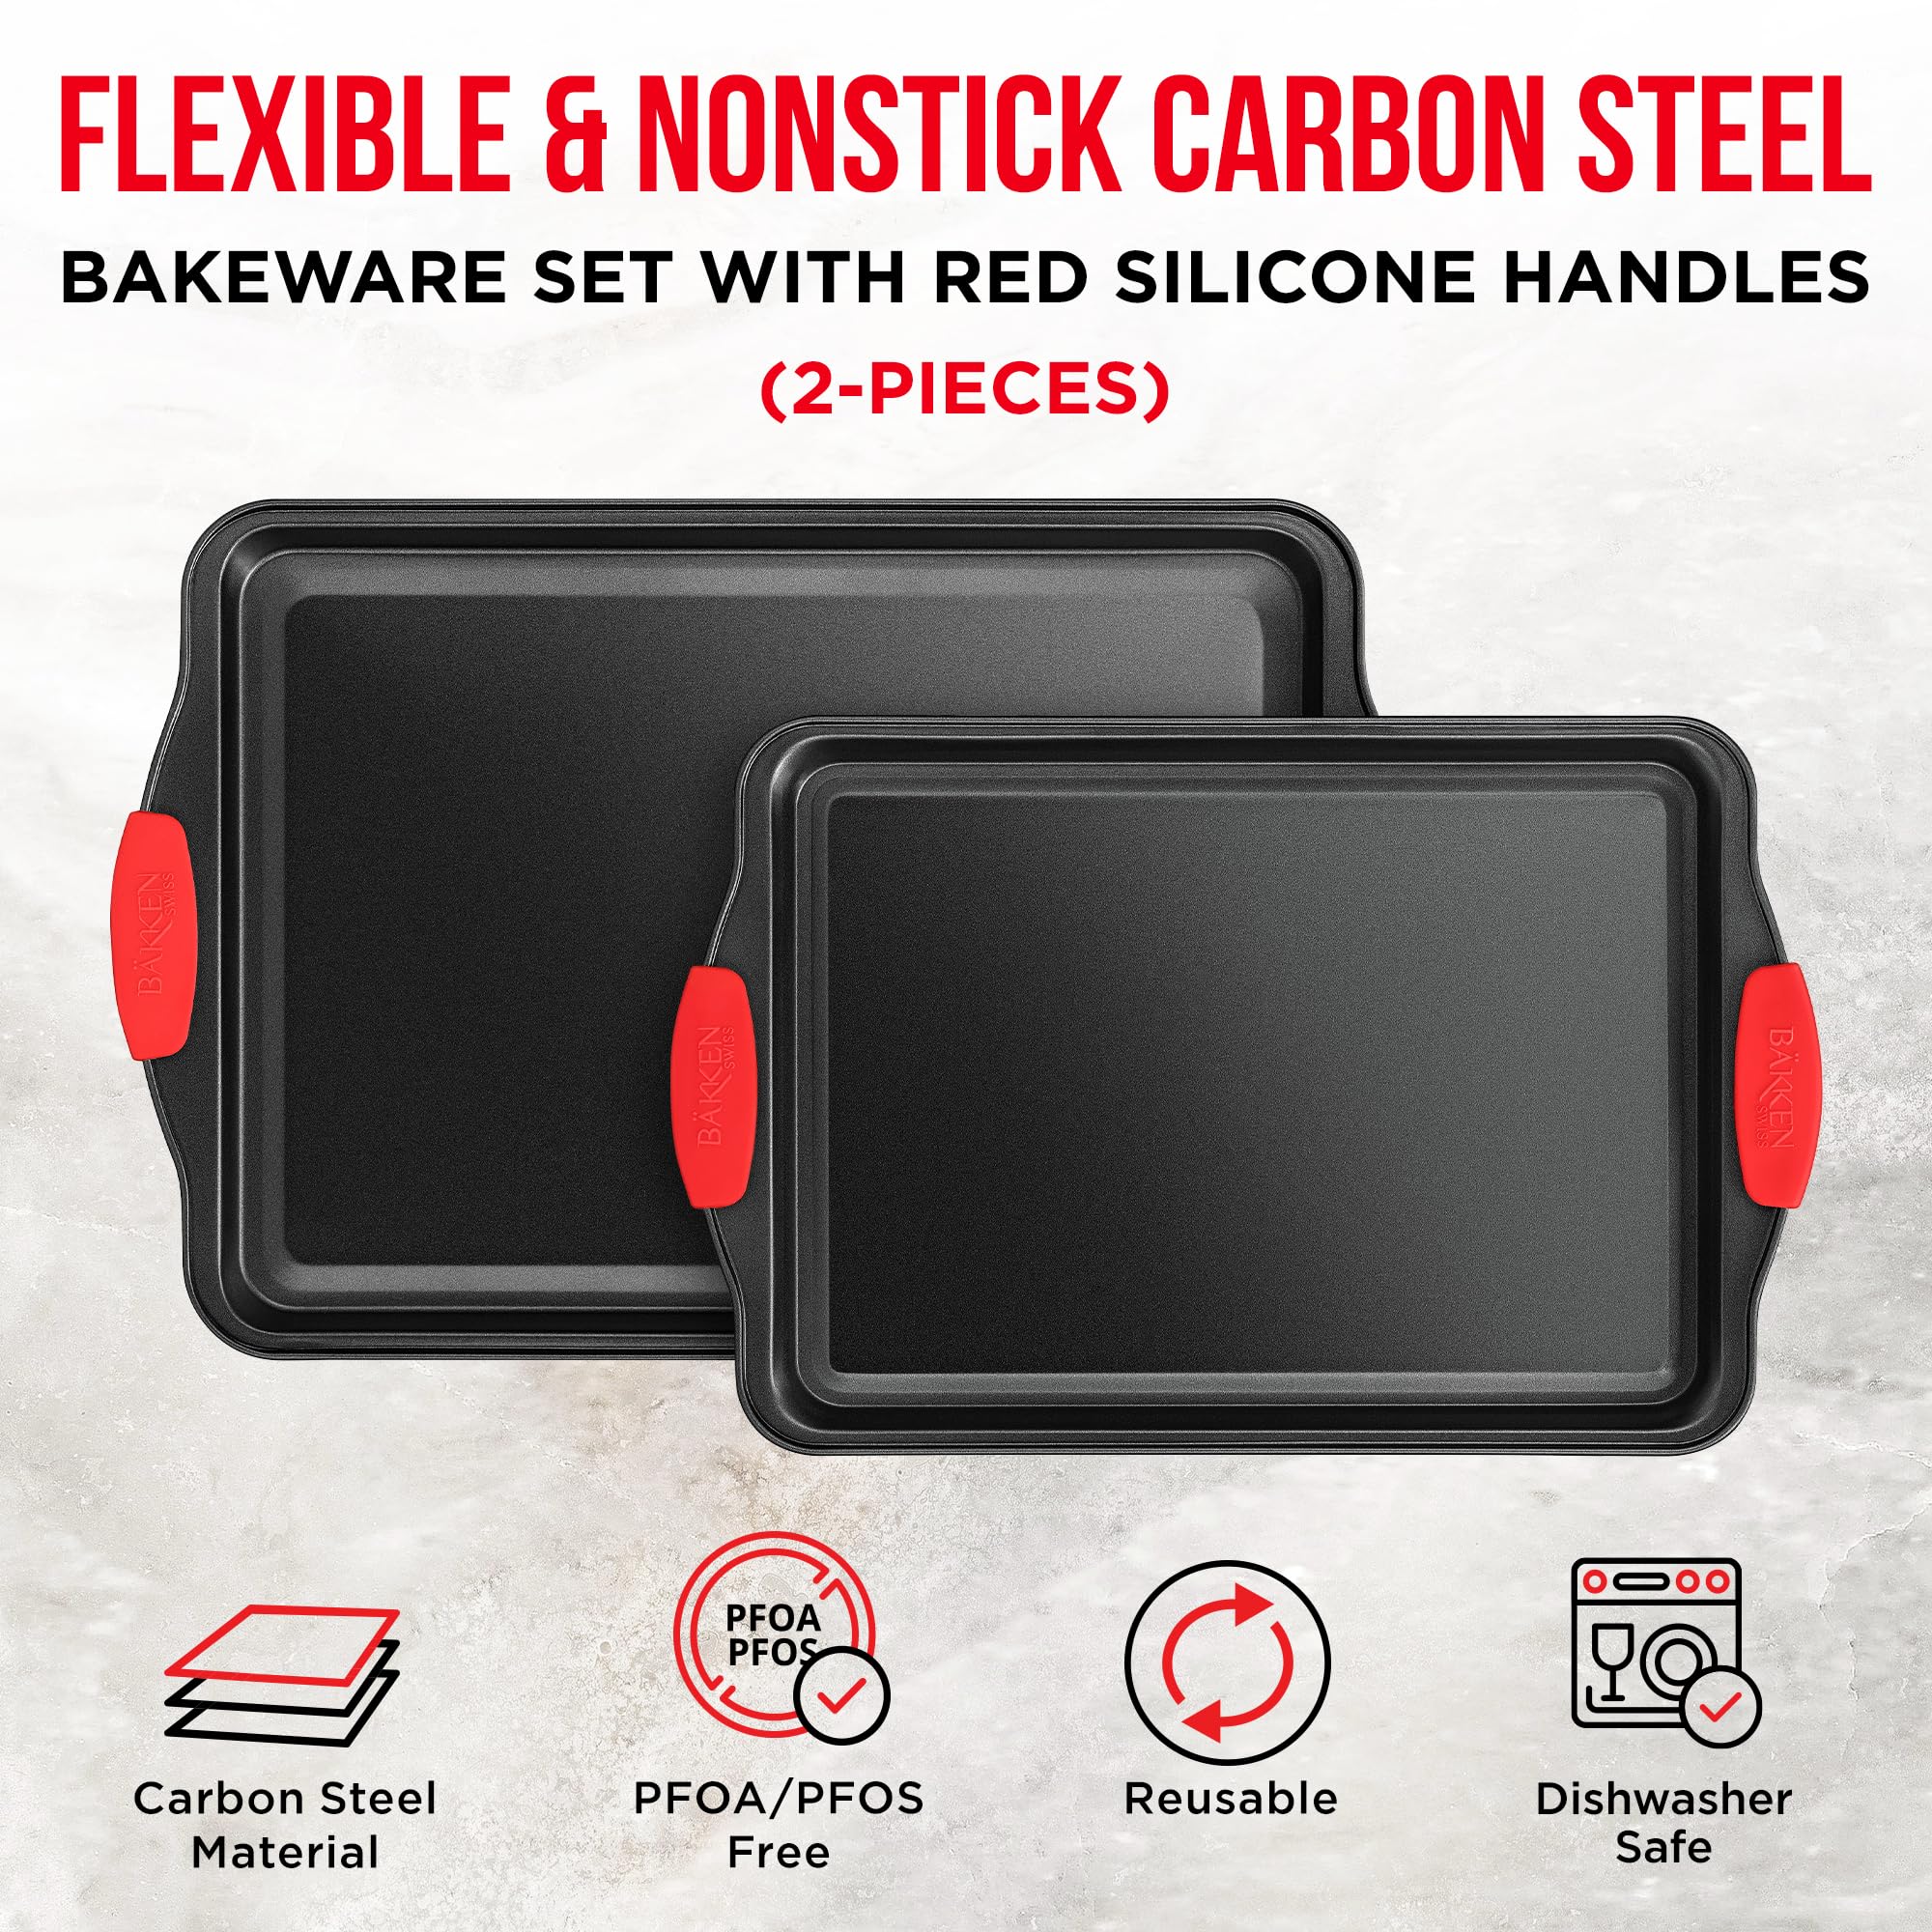 2 Piece Set Nonstick Carbon Steel Oven Bakeware -Professional Quality Kitchen Cooking Baking Trays -PFOA, PFOS, PTFE-Free Medium & Large Baking Sheet Pans with Red Silicone Handles